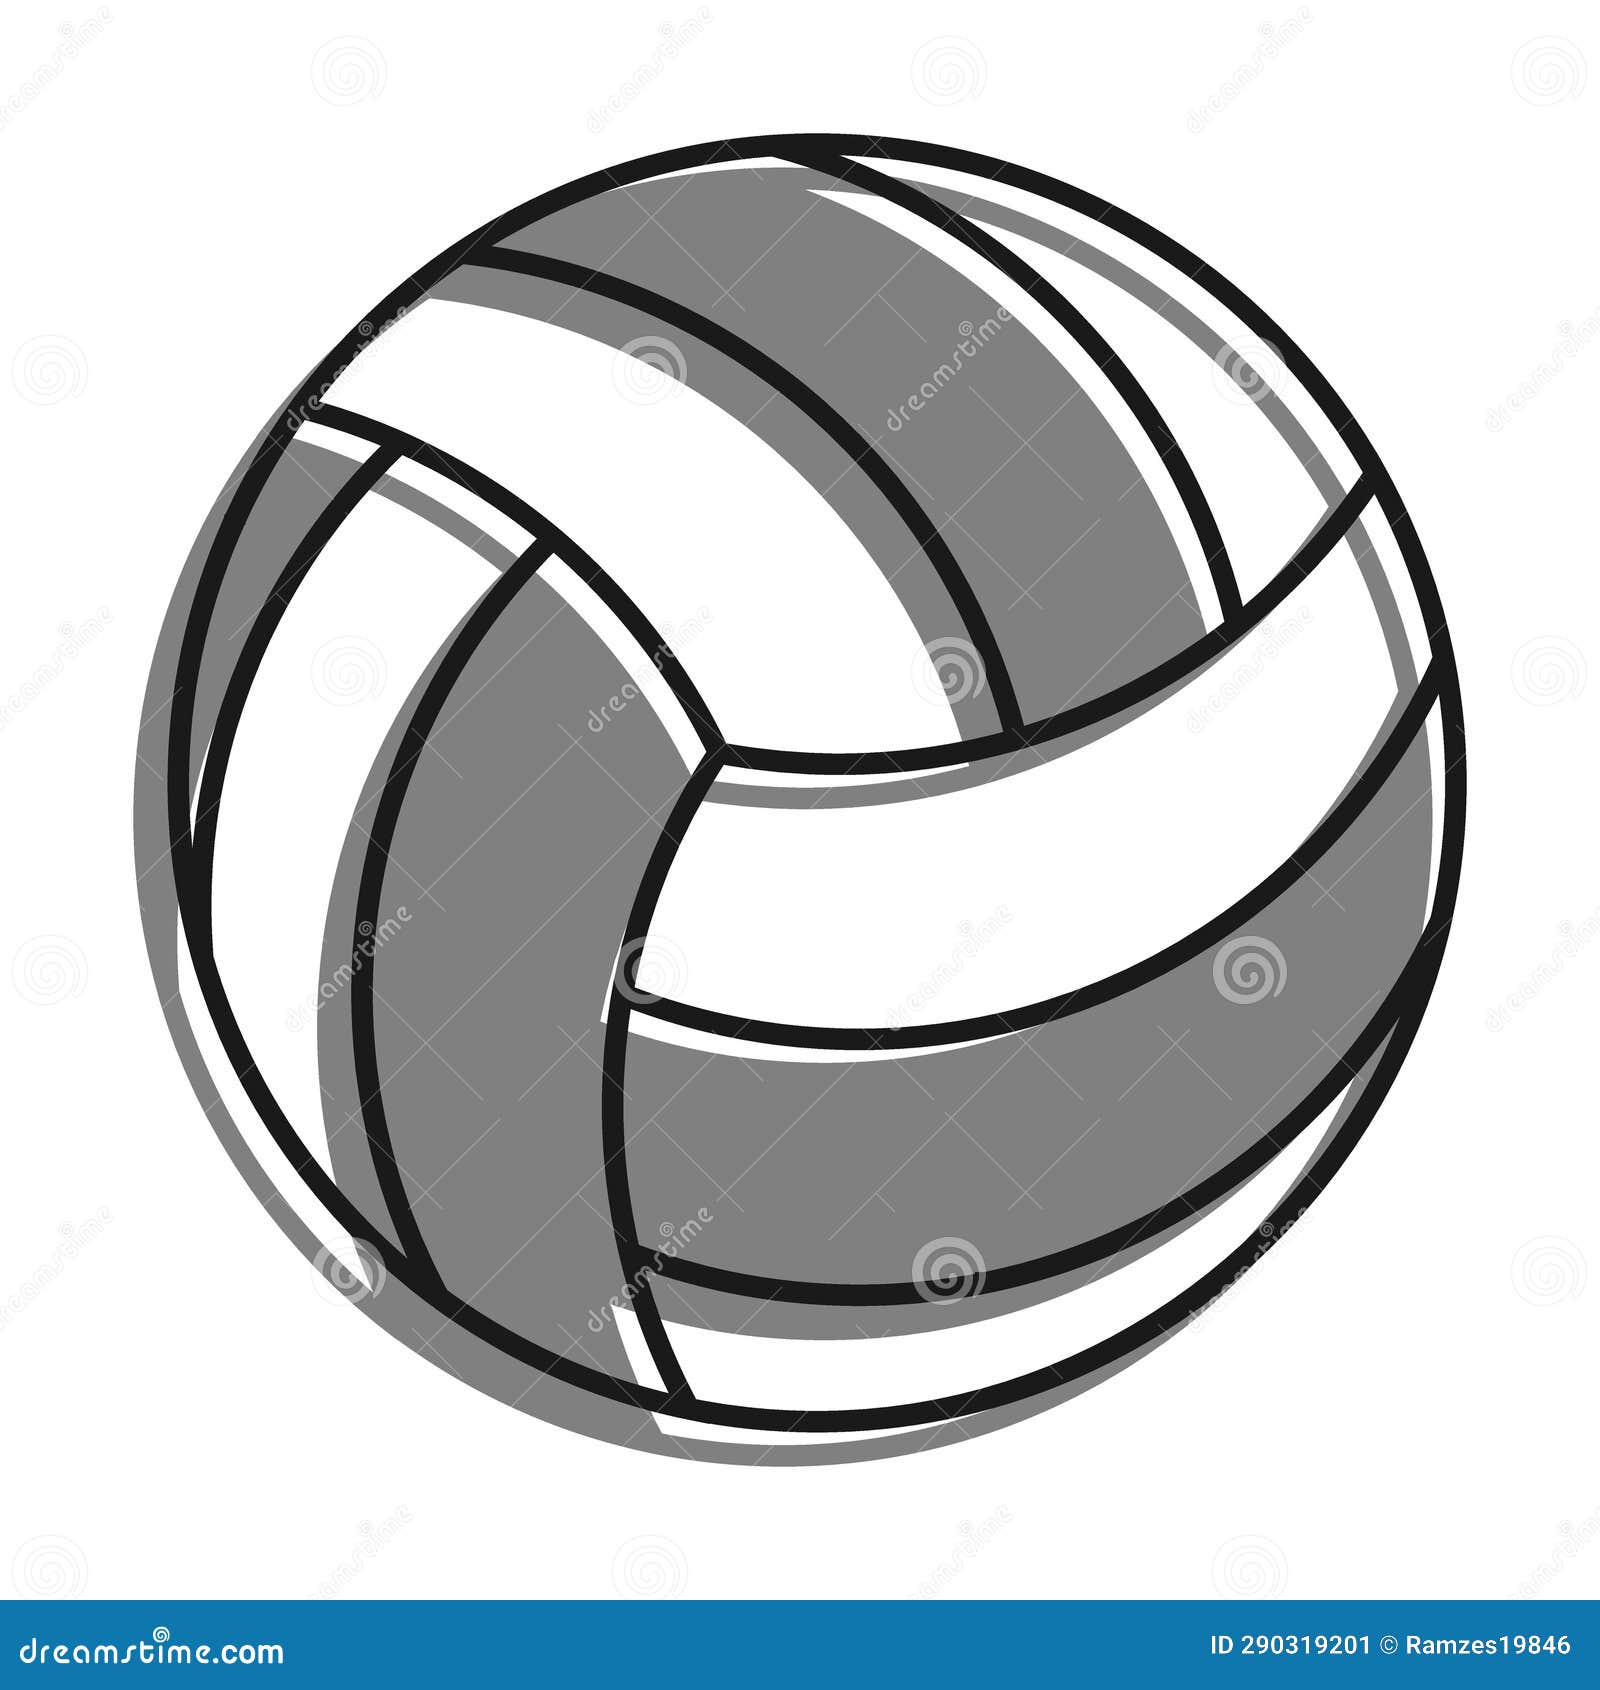 Linear Icon. Volleyball Ball for Indoor, Outdoor and Beach Volleyball ...